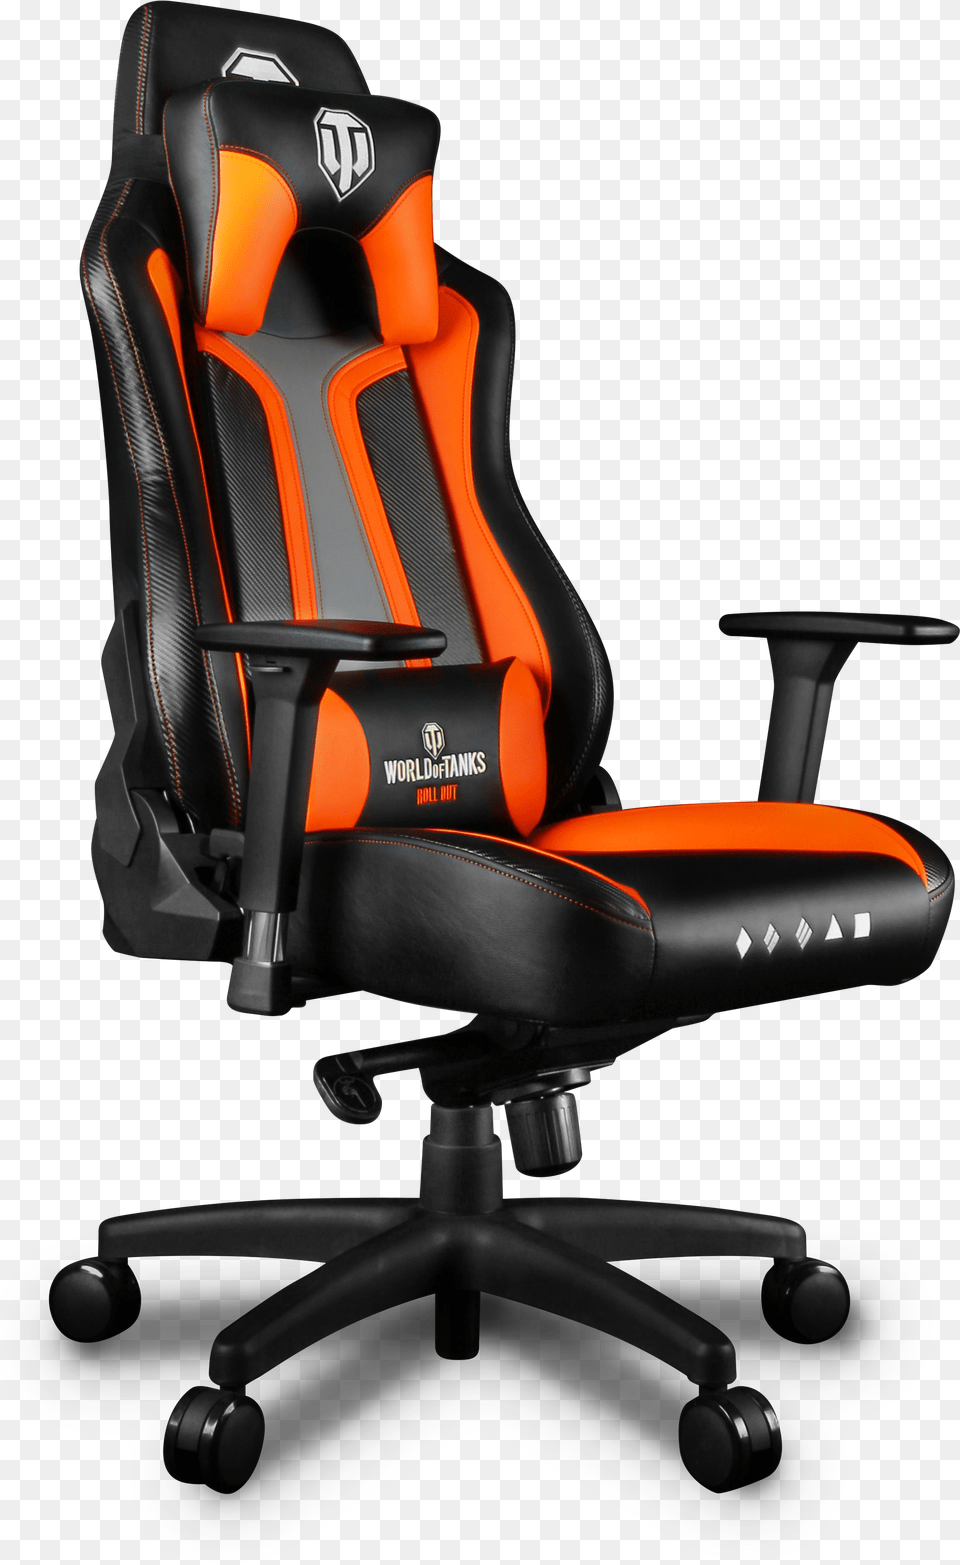 Dxracer World Of Tanks Gaming Chair, Cushion, Home Decor, Furniture, Headrest Free Transparent Png